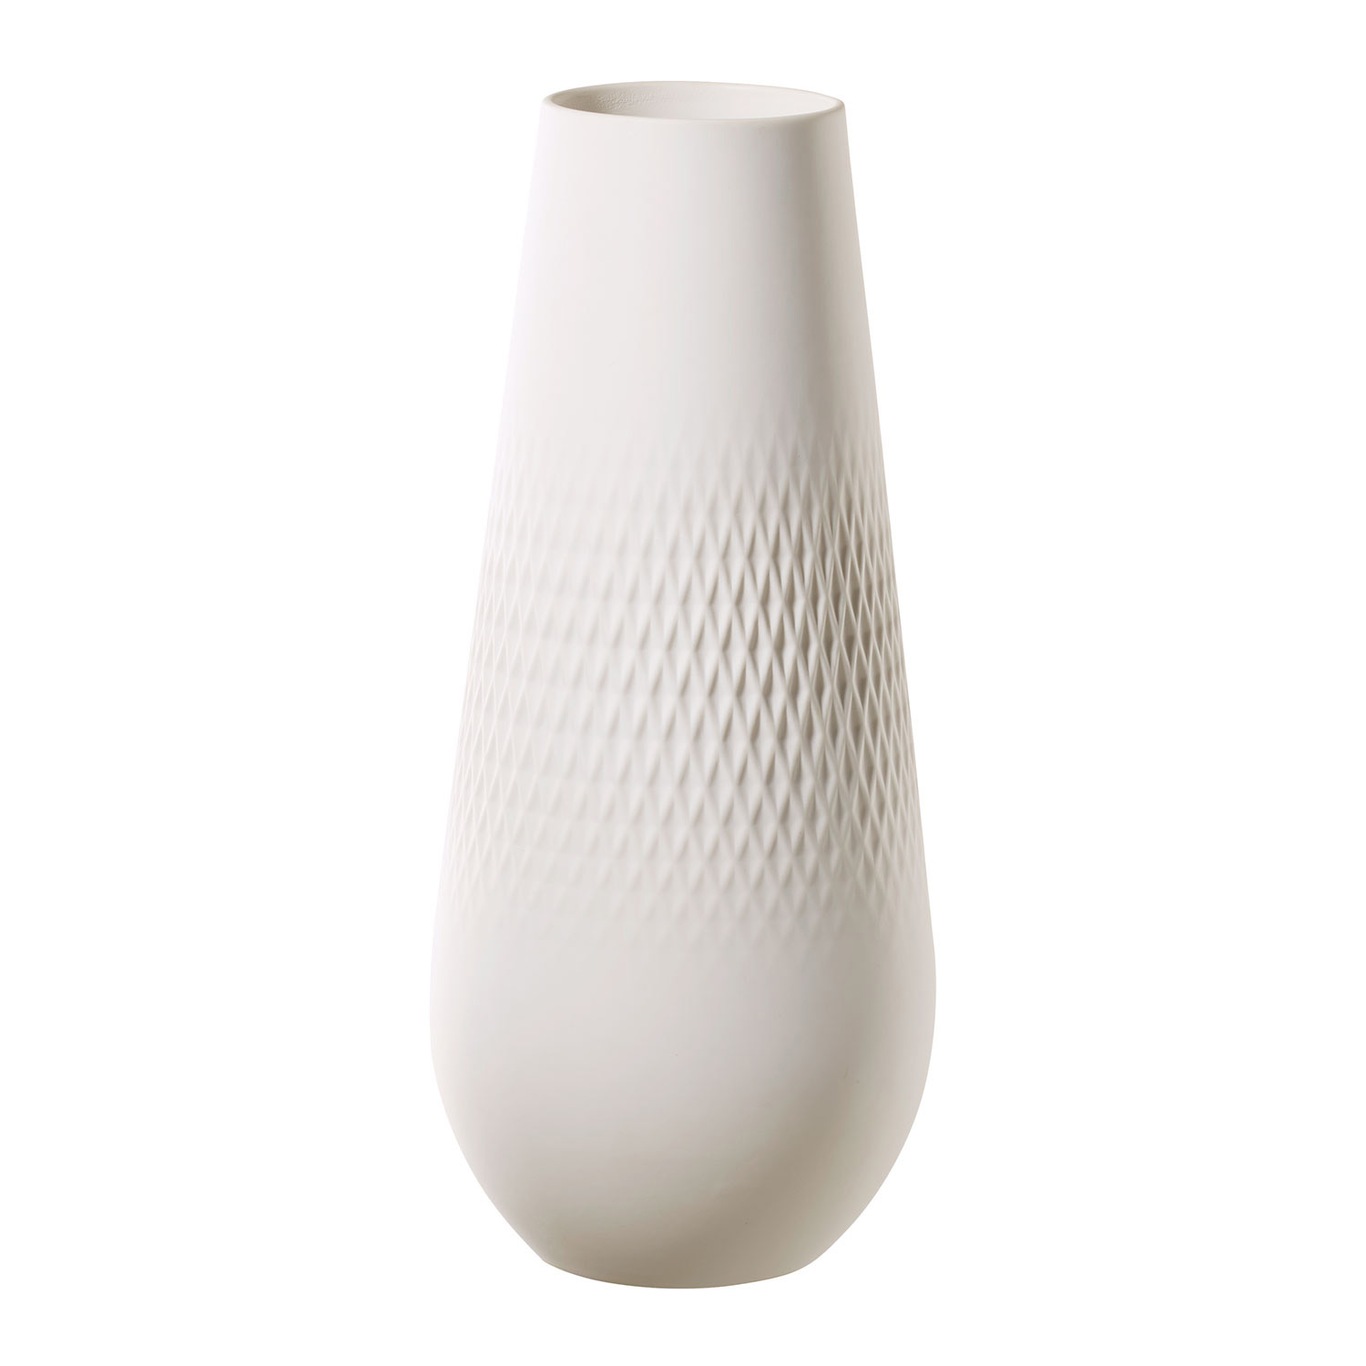 Collier Blanc Vase Carre, High